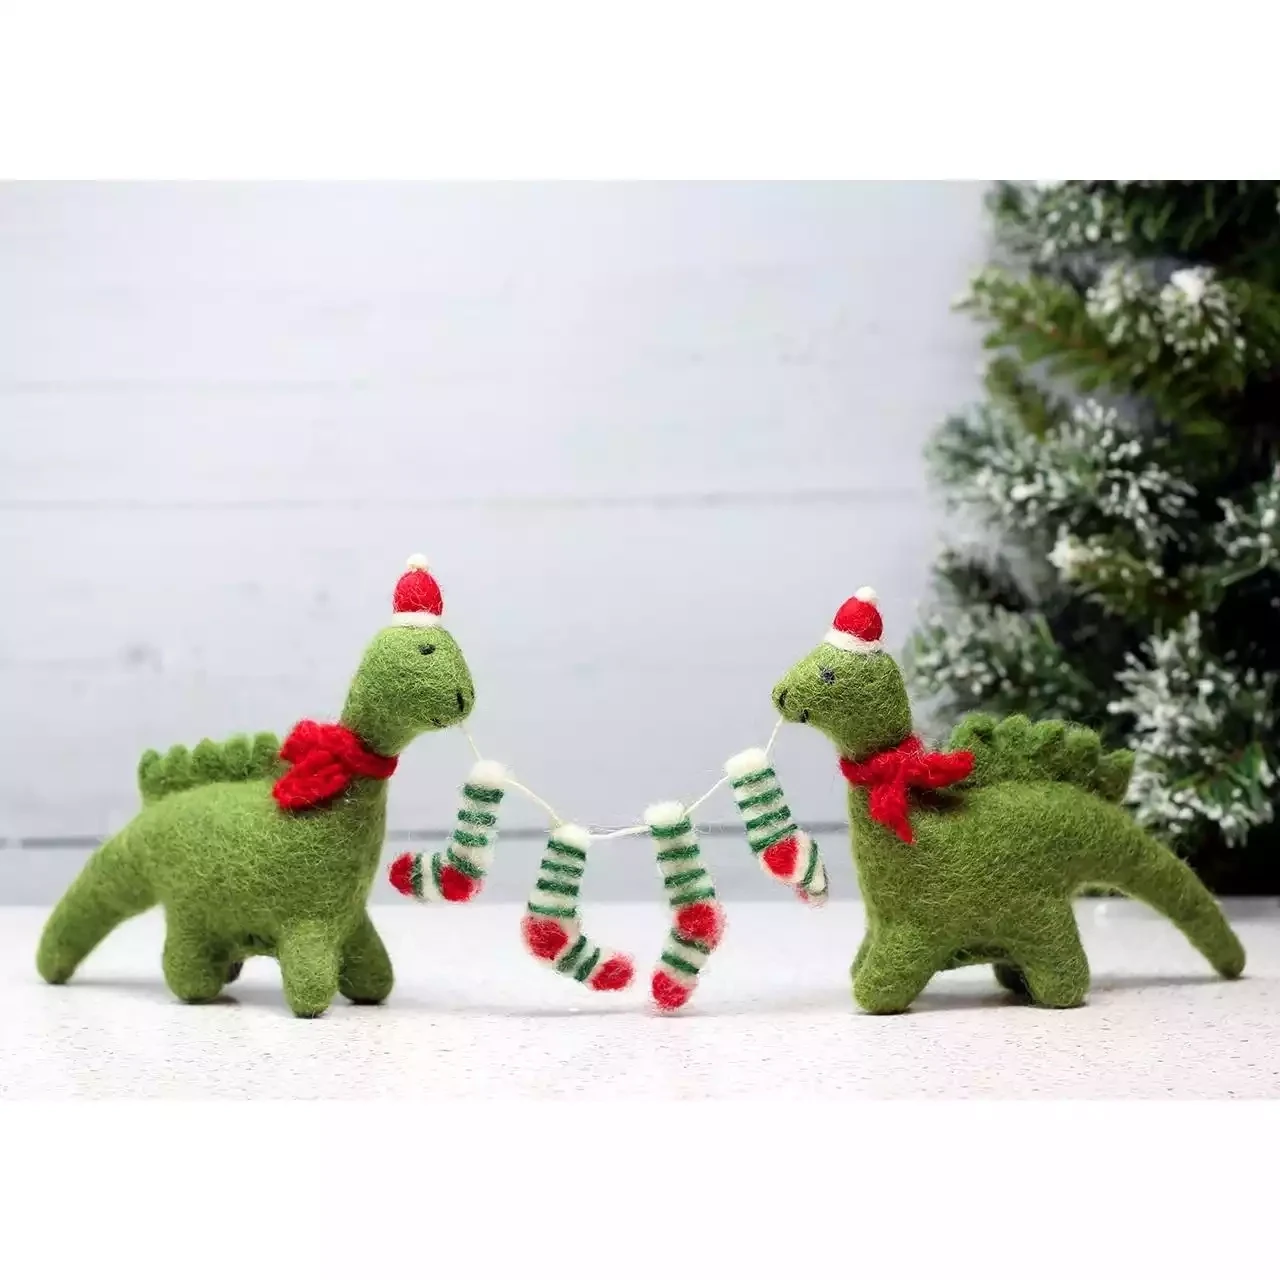 Diplodocus Pair With Stocking Garland Felt Christmas Decoration by Amica